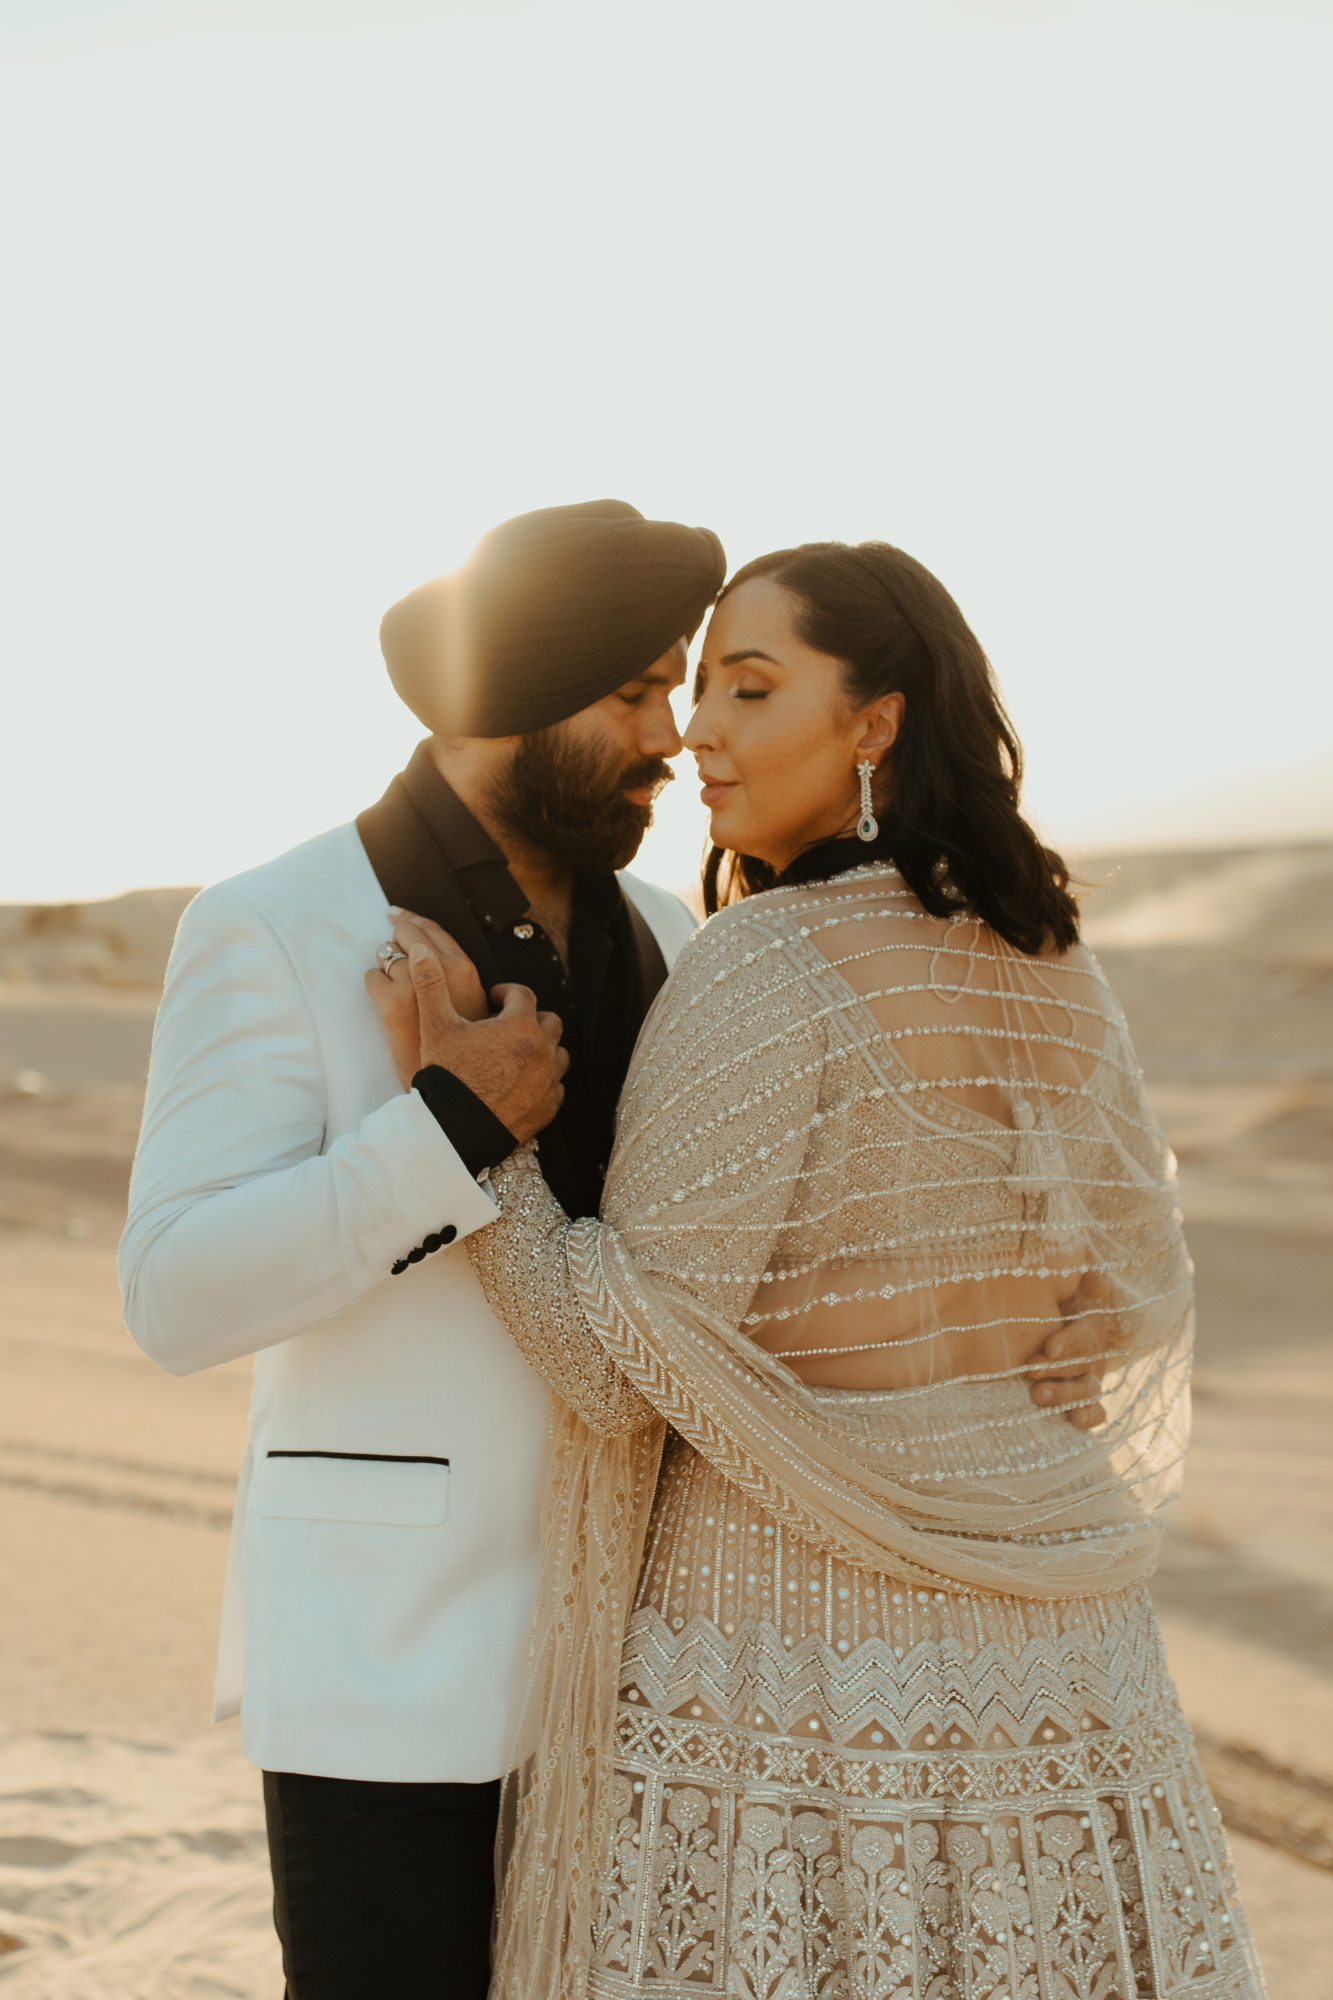 bride and groom putting their faces close together while enjoying the sunset in the desert